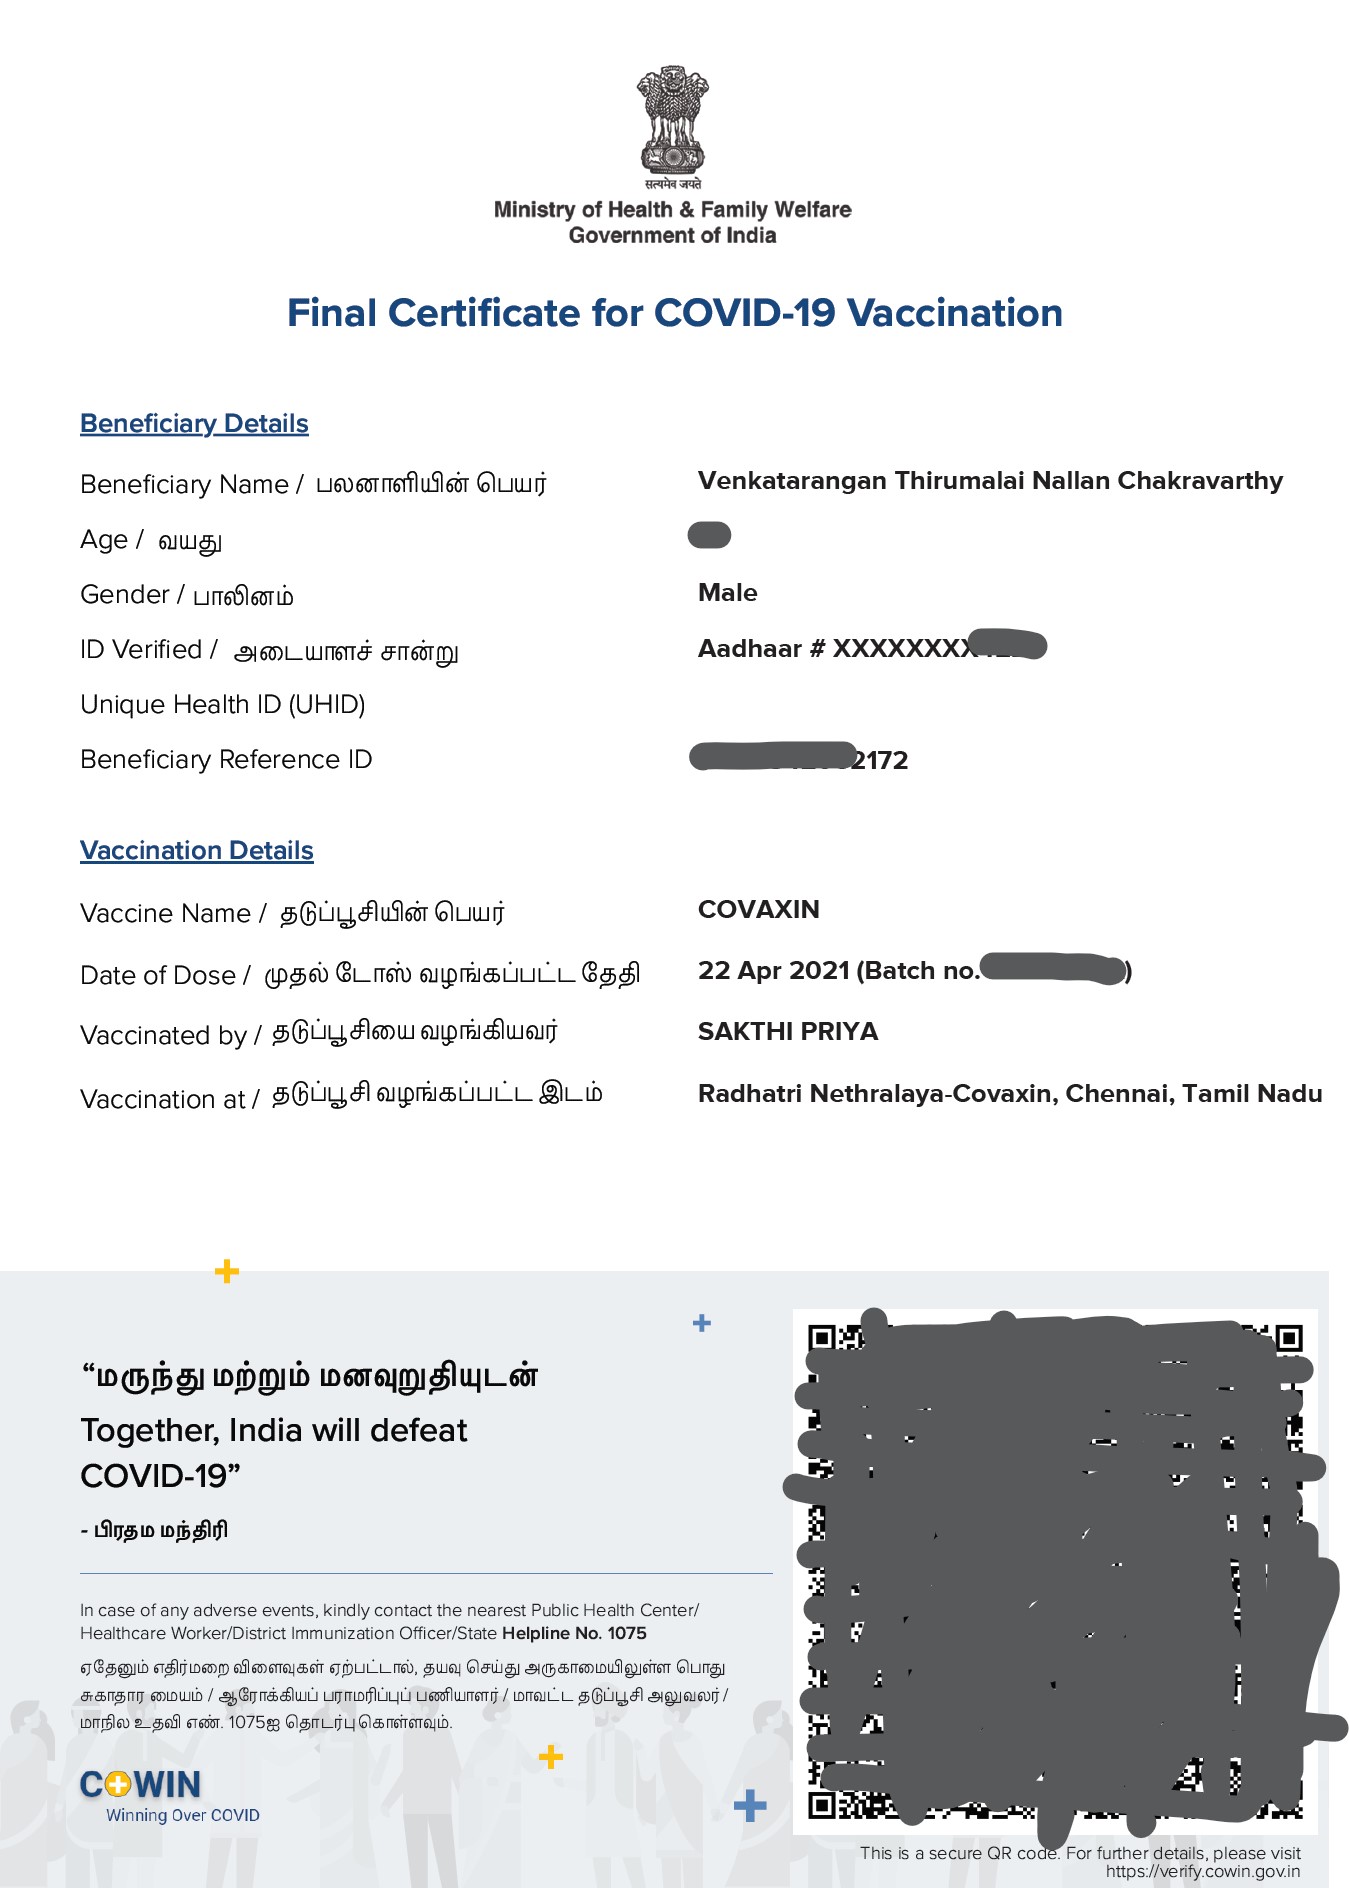 Got my final dose of COVID-19 vaccination